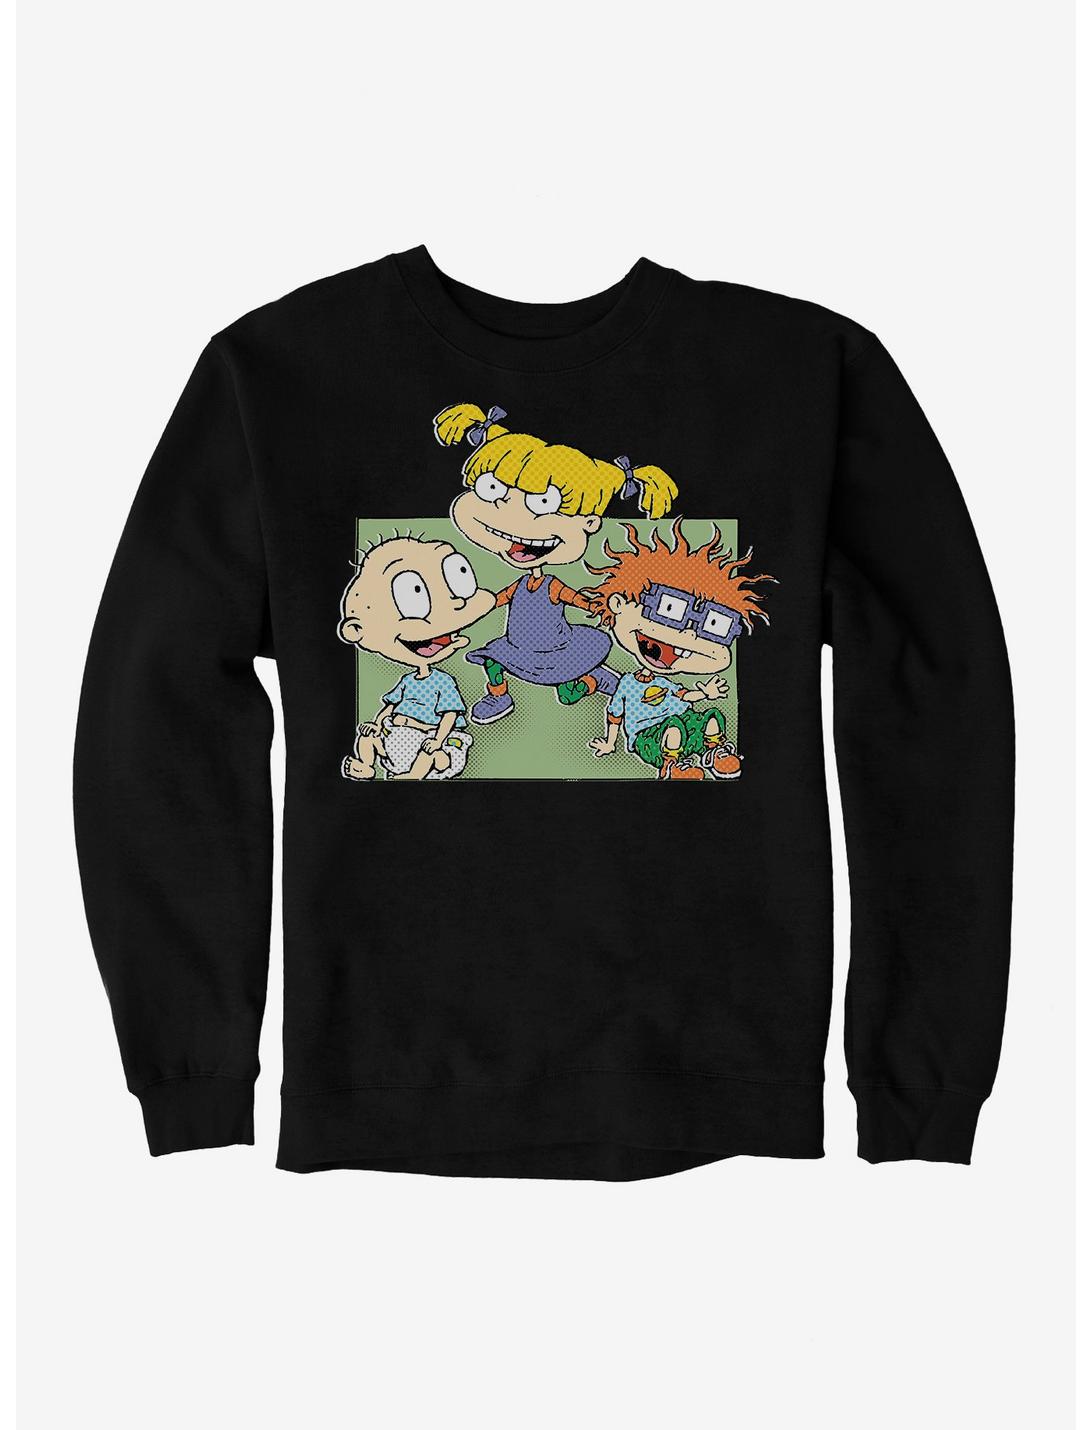 Rugrats Angelica Tommy And Chuckie Sweatshirt, BLACK, hi-res